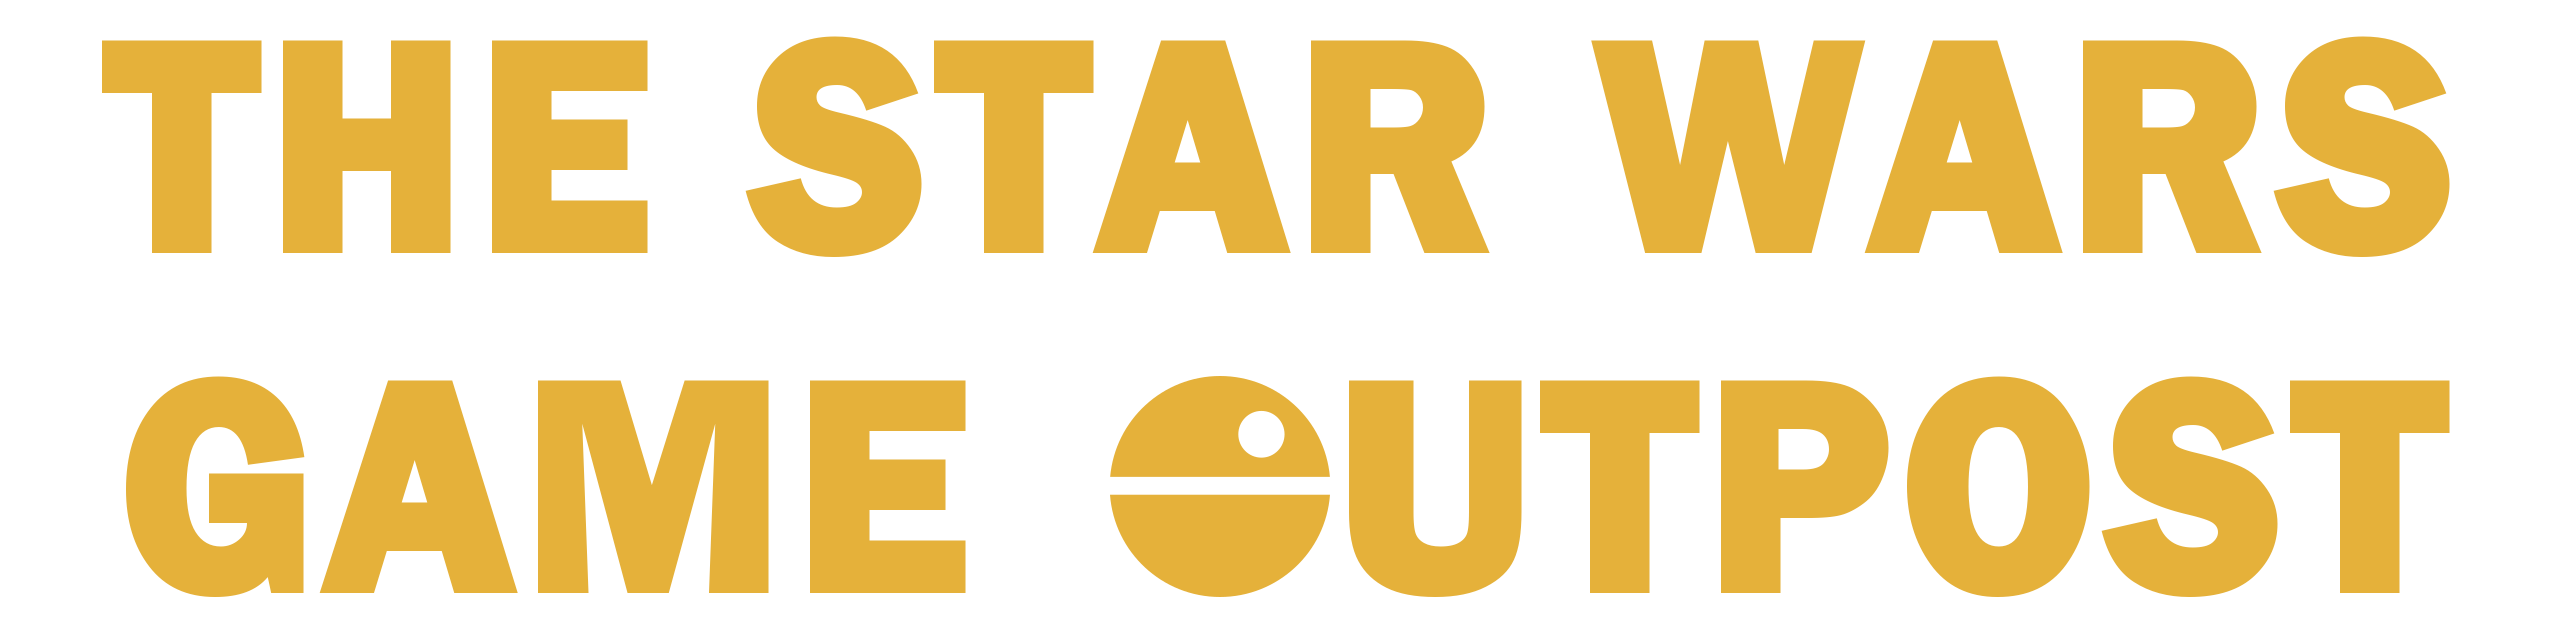 The Star Wars Game Outpost